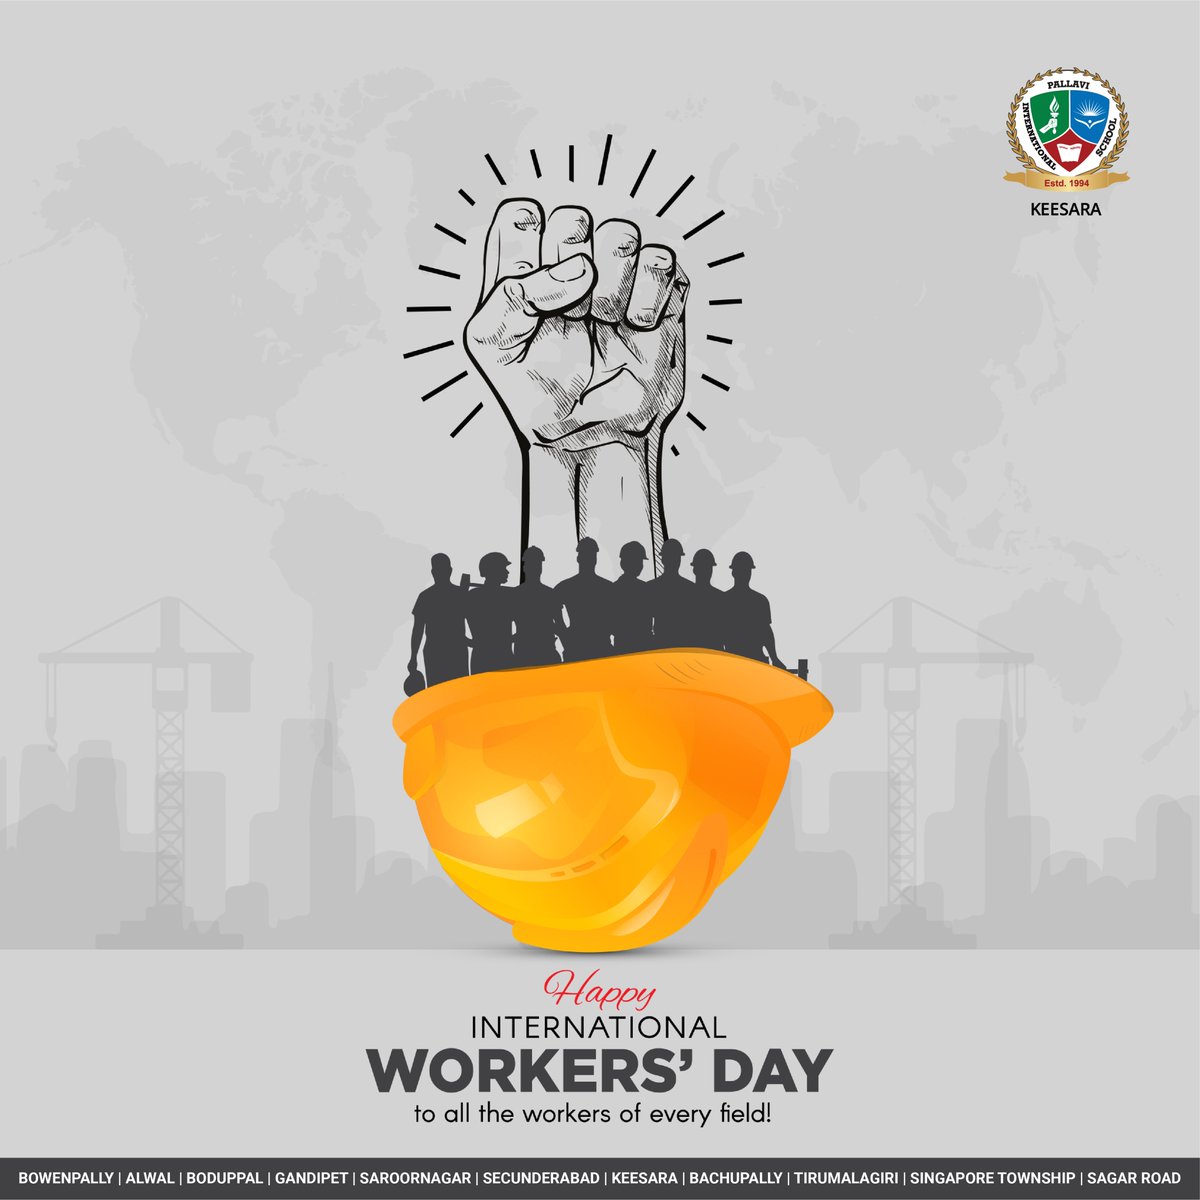 🎉 Happy INTERNATIONAL WORKERS' DAY! 🛠️ Cheers to all the dedicated workers worldwide who contribute tirelessly to build our societies. Your hard work and dedication are truly appreciated! 🌟

#internationalworkersday #dedication #thankyouworkers #dedication #pgos #piskeesara